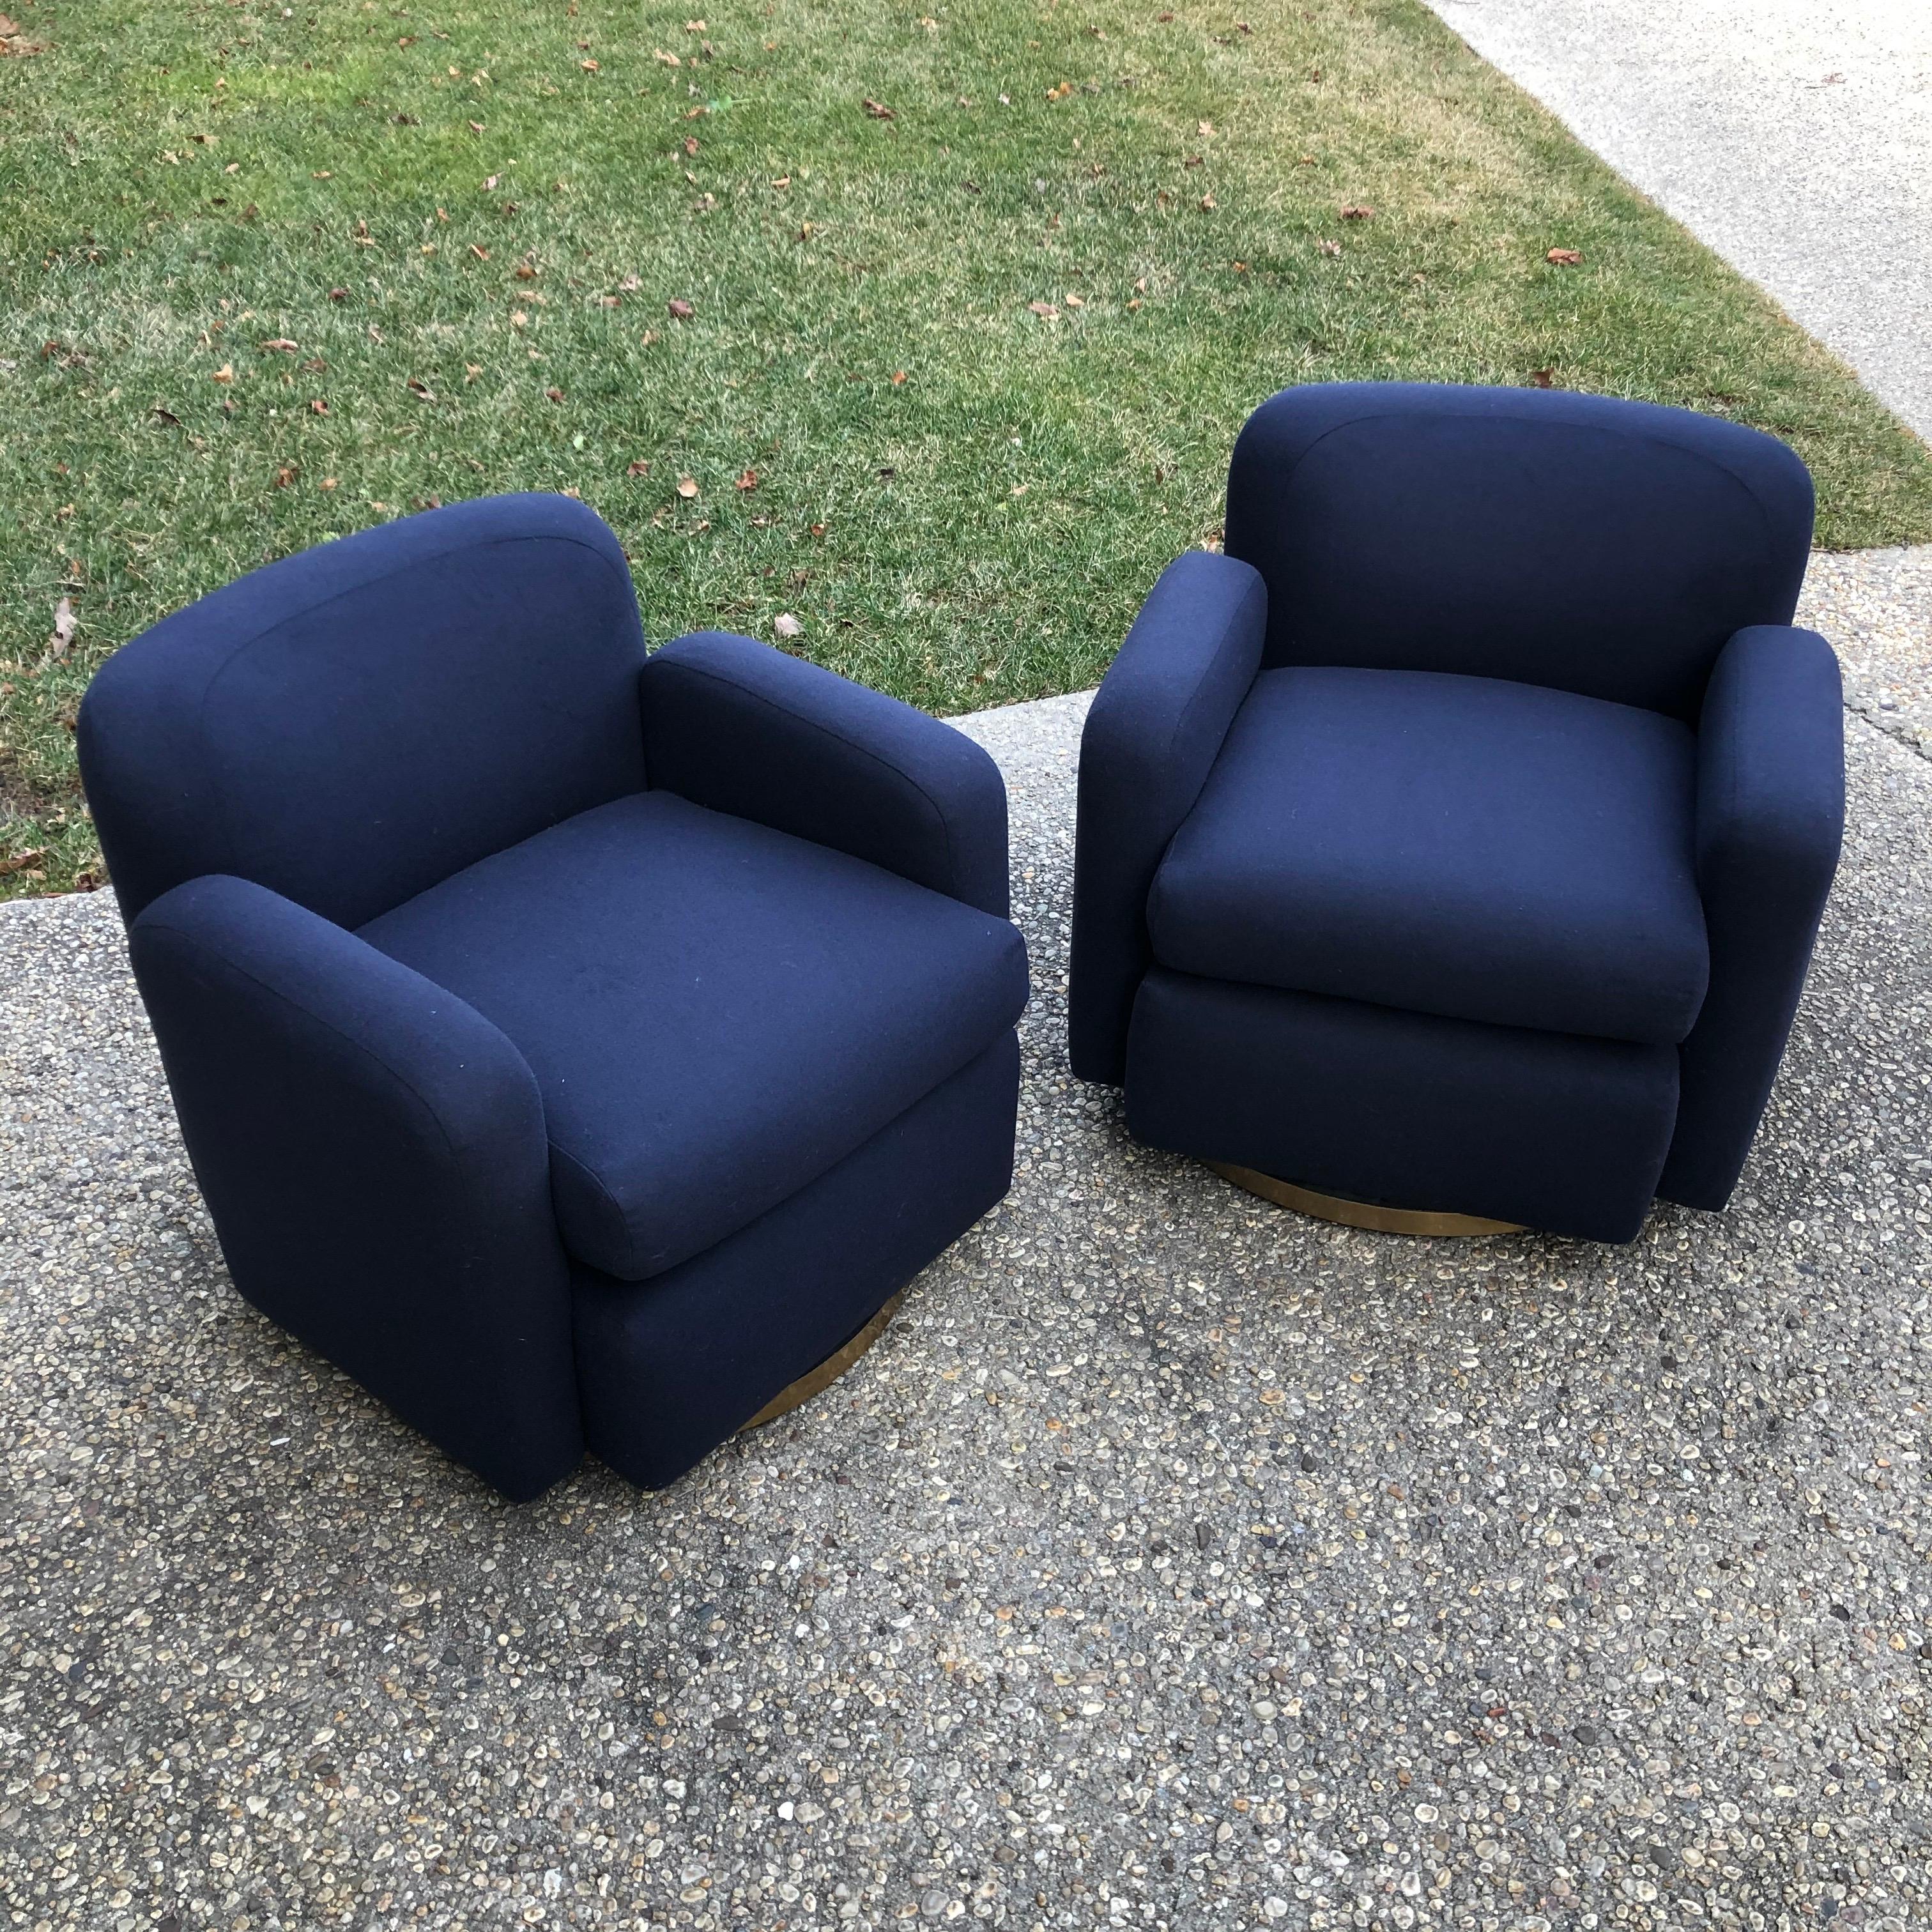 Pair of Thayer Coggin club chairs. Newly reupholstered in dark navy blue wool/ Cashmere. Brass swivel bases work well.
Measures: Seat height 16.5